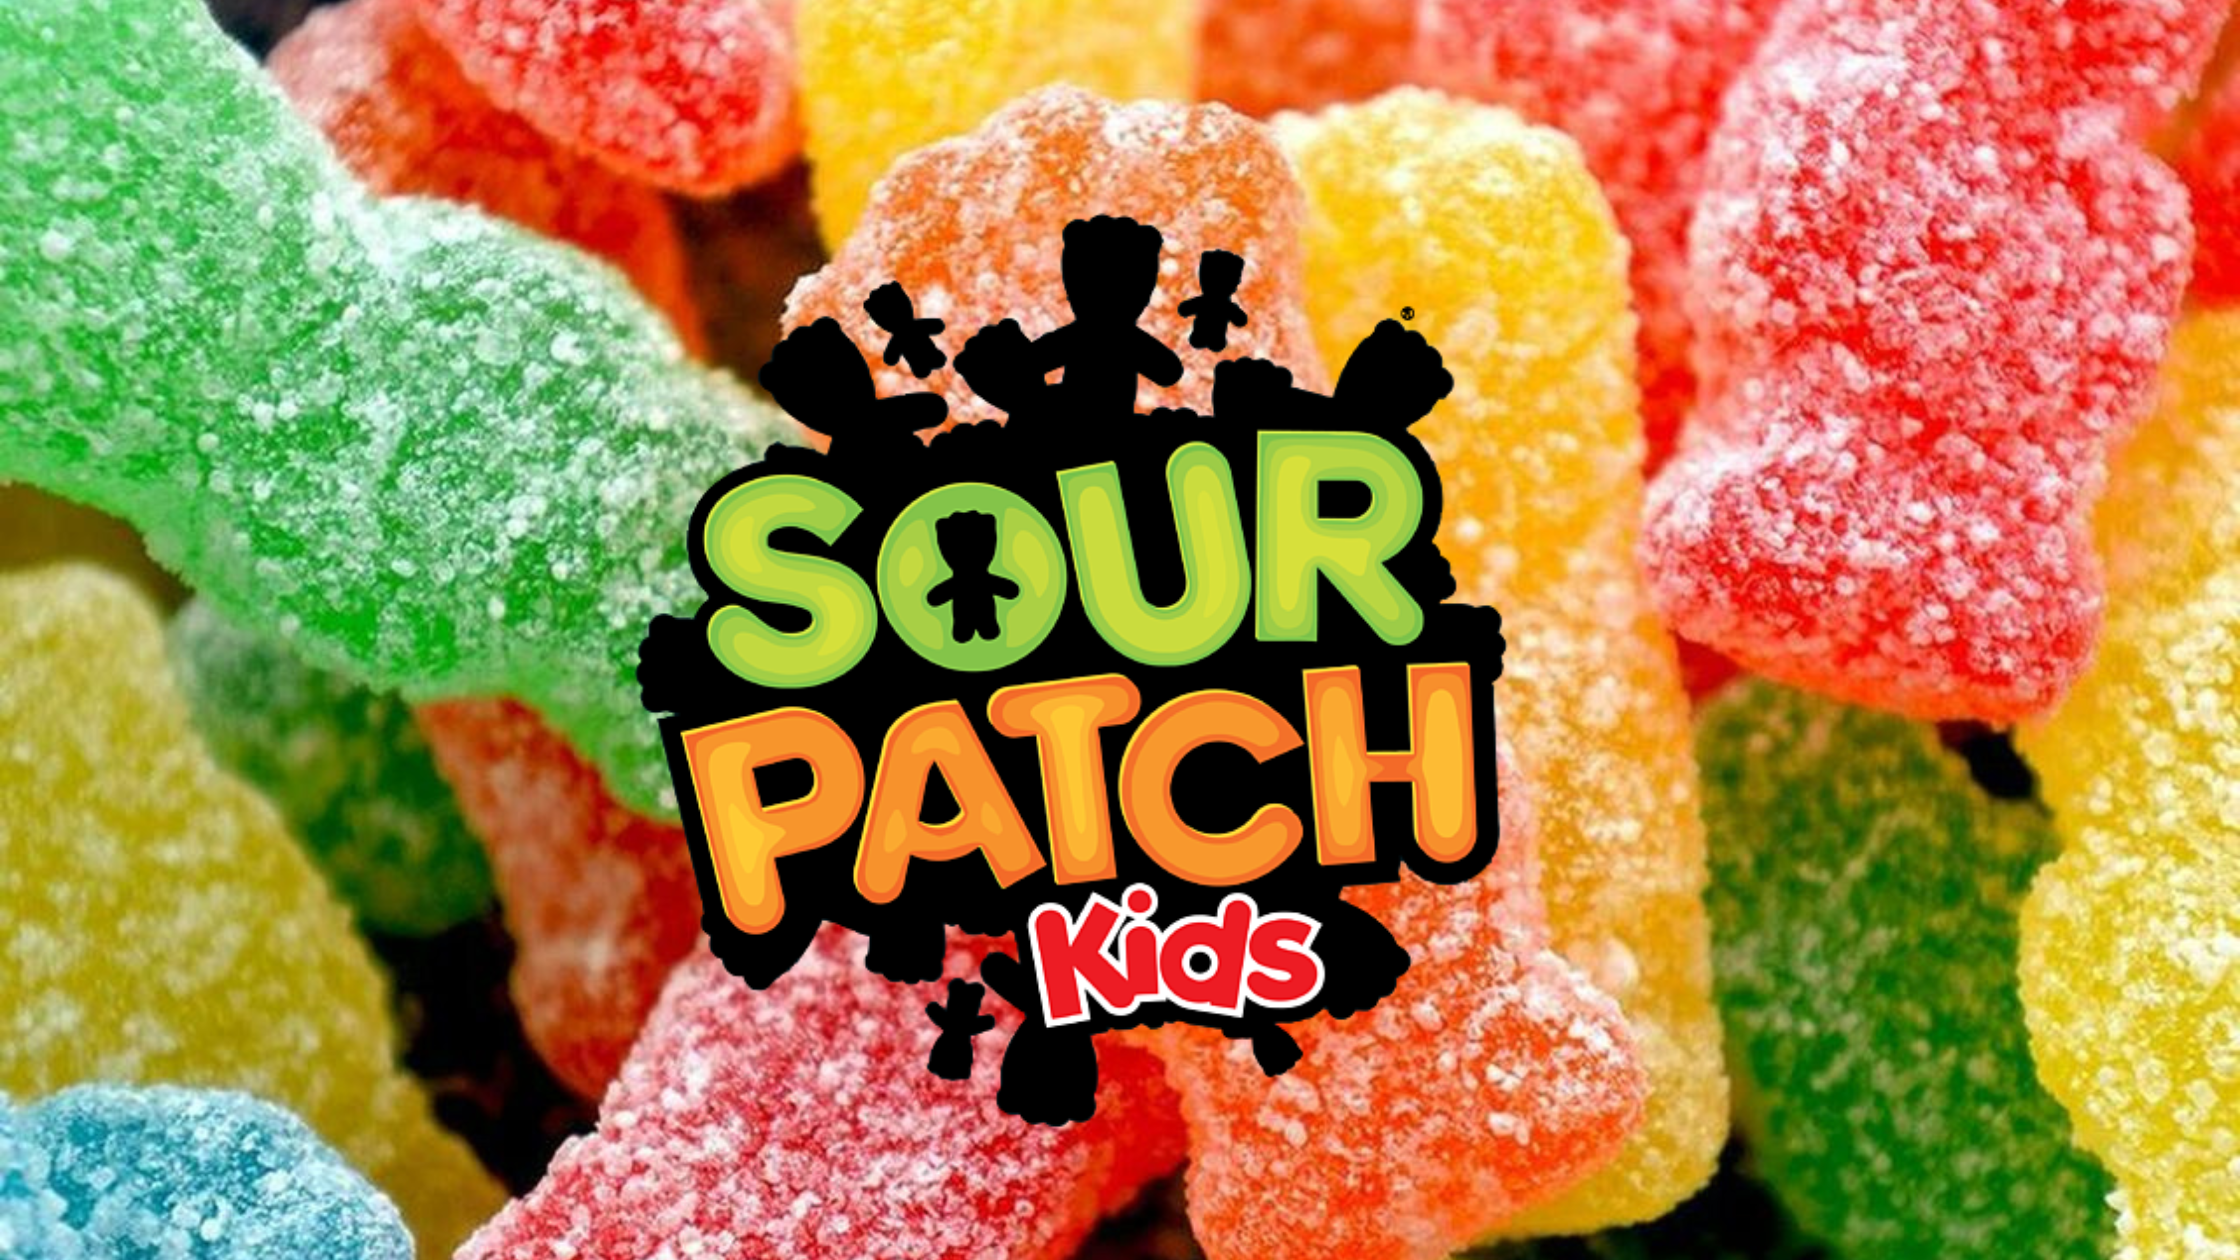 Time To Pucker Up With Sour Patch Kids